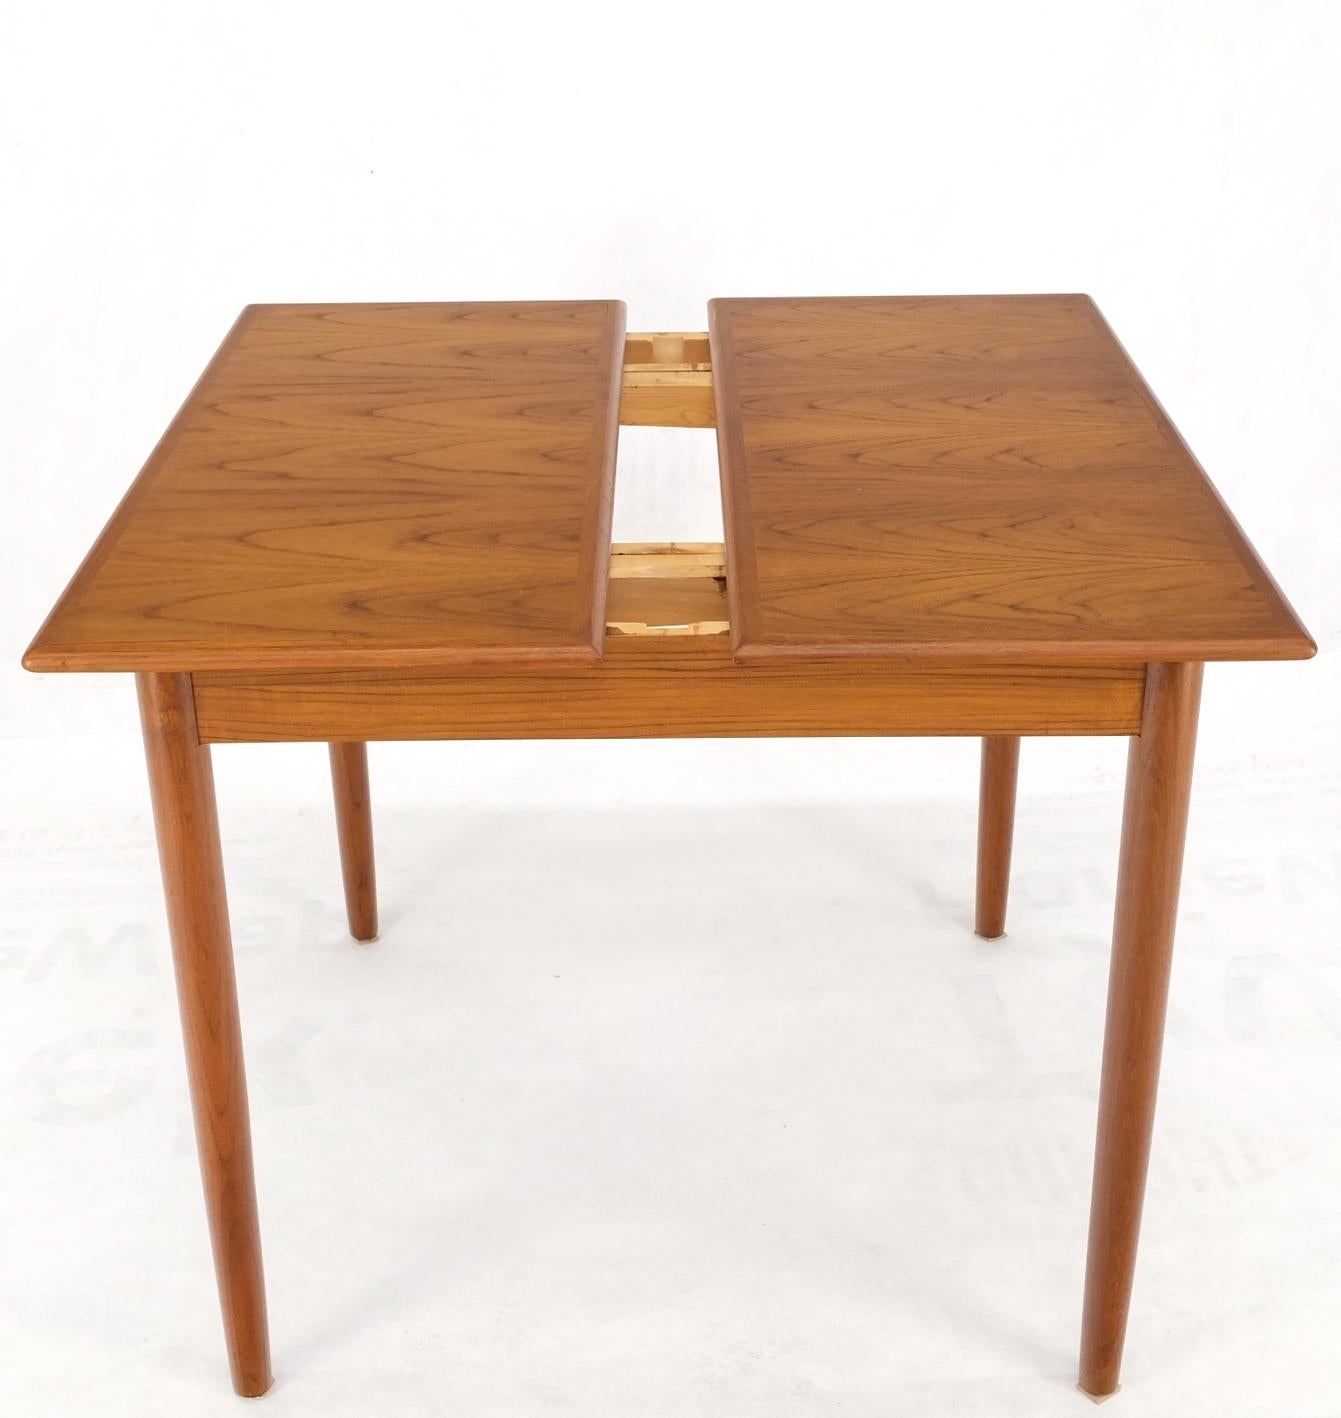 Danish Mid-Century Modern Square Teak Refectory Extension Boards Dining Table For Sale 8